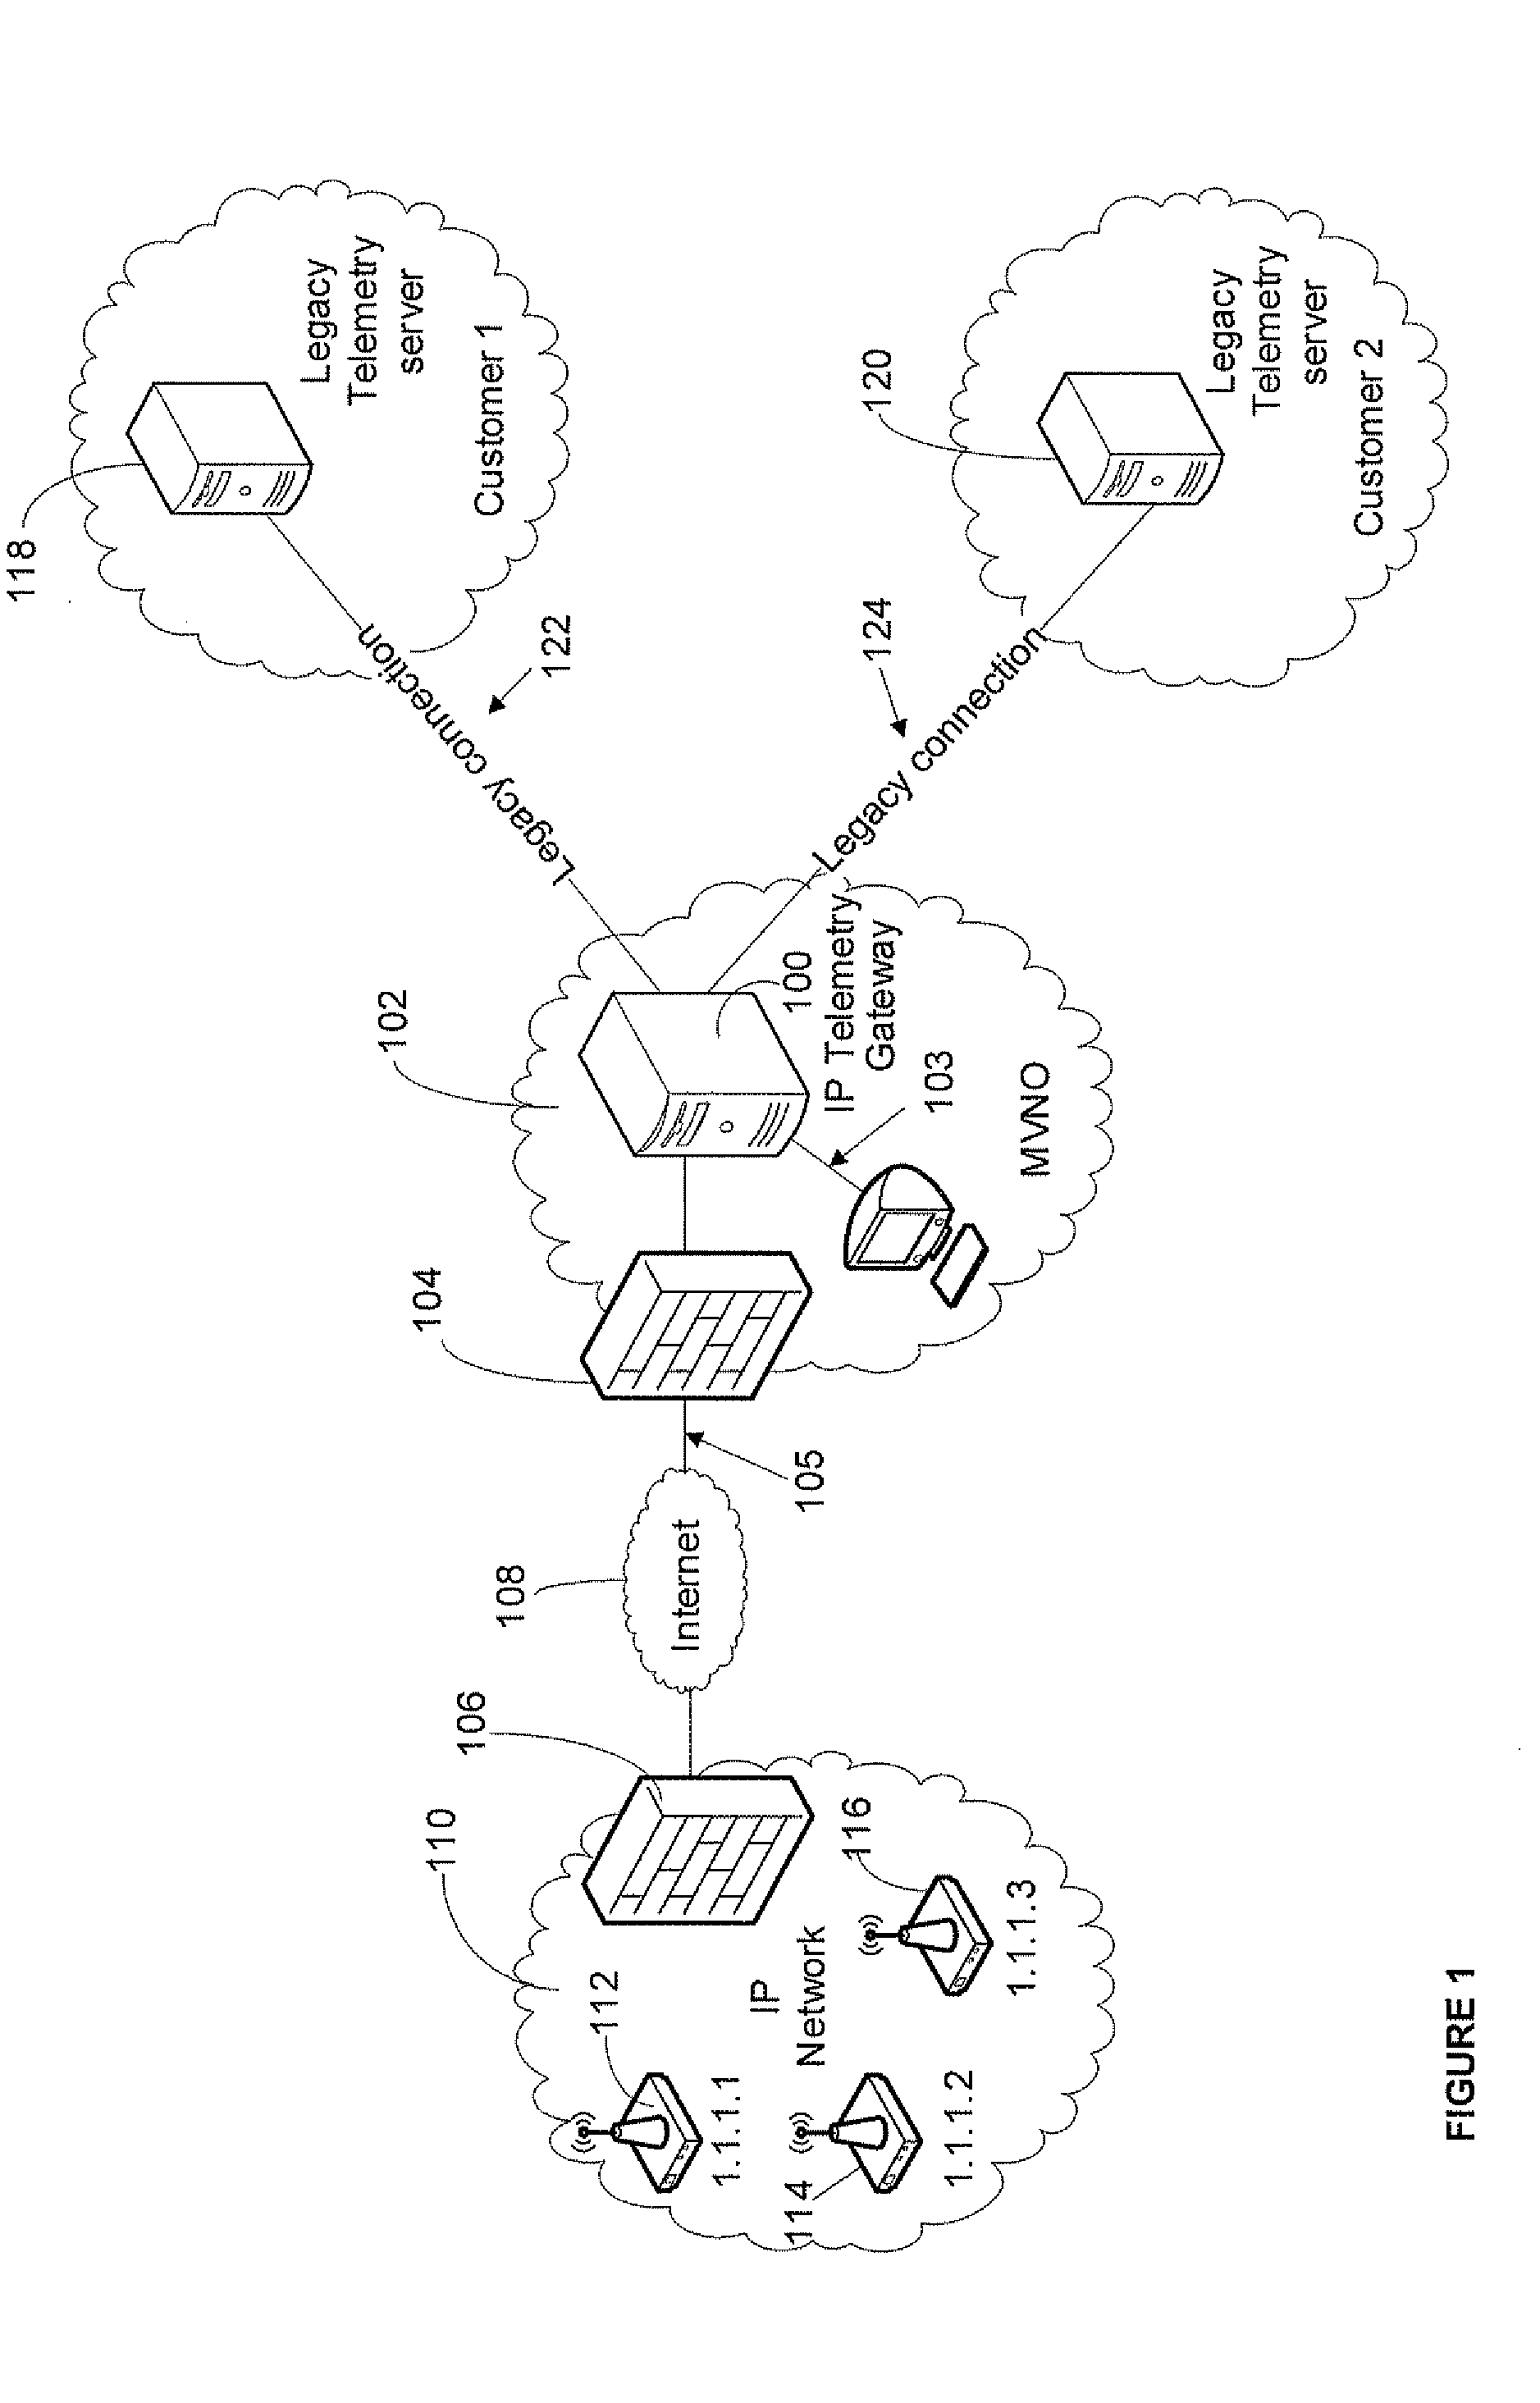 Distributed Architecture for IP-Based Telemetry Services